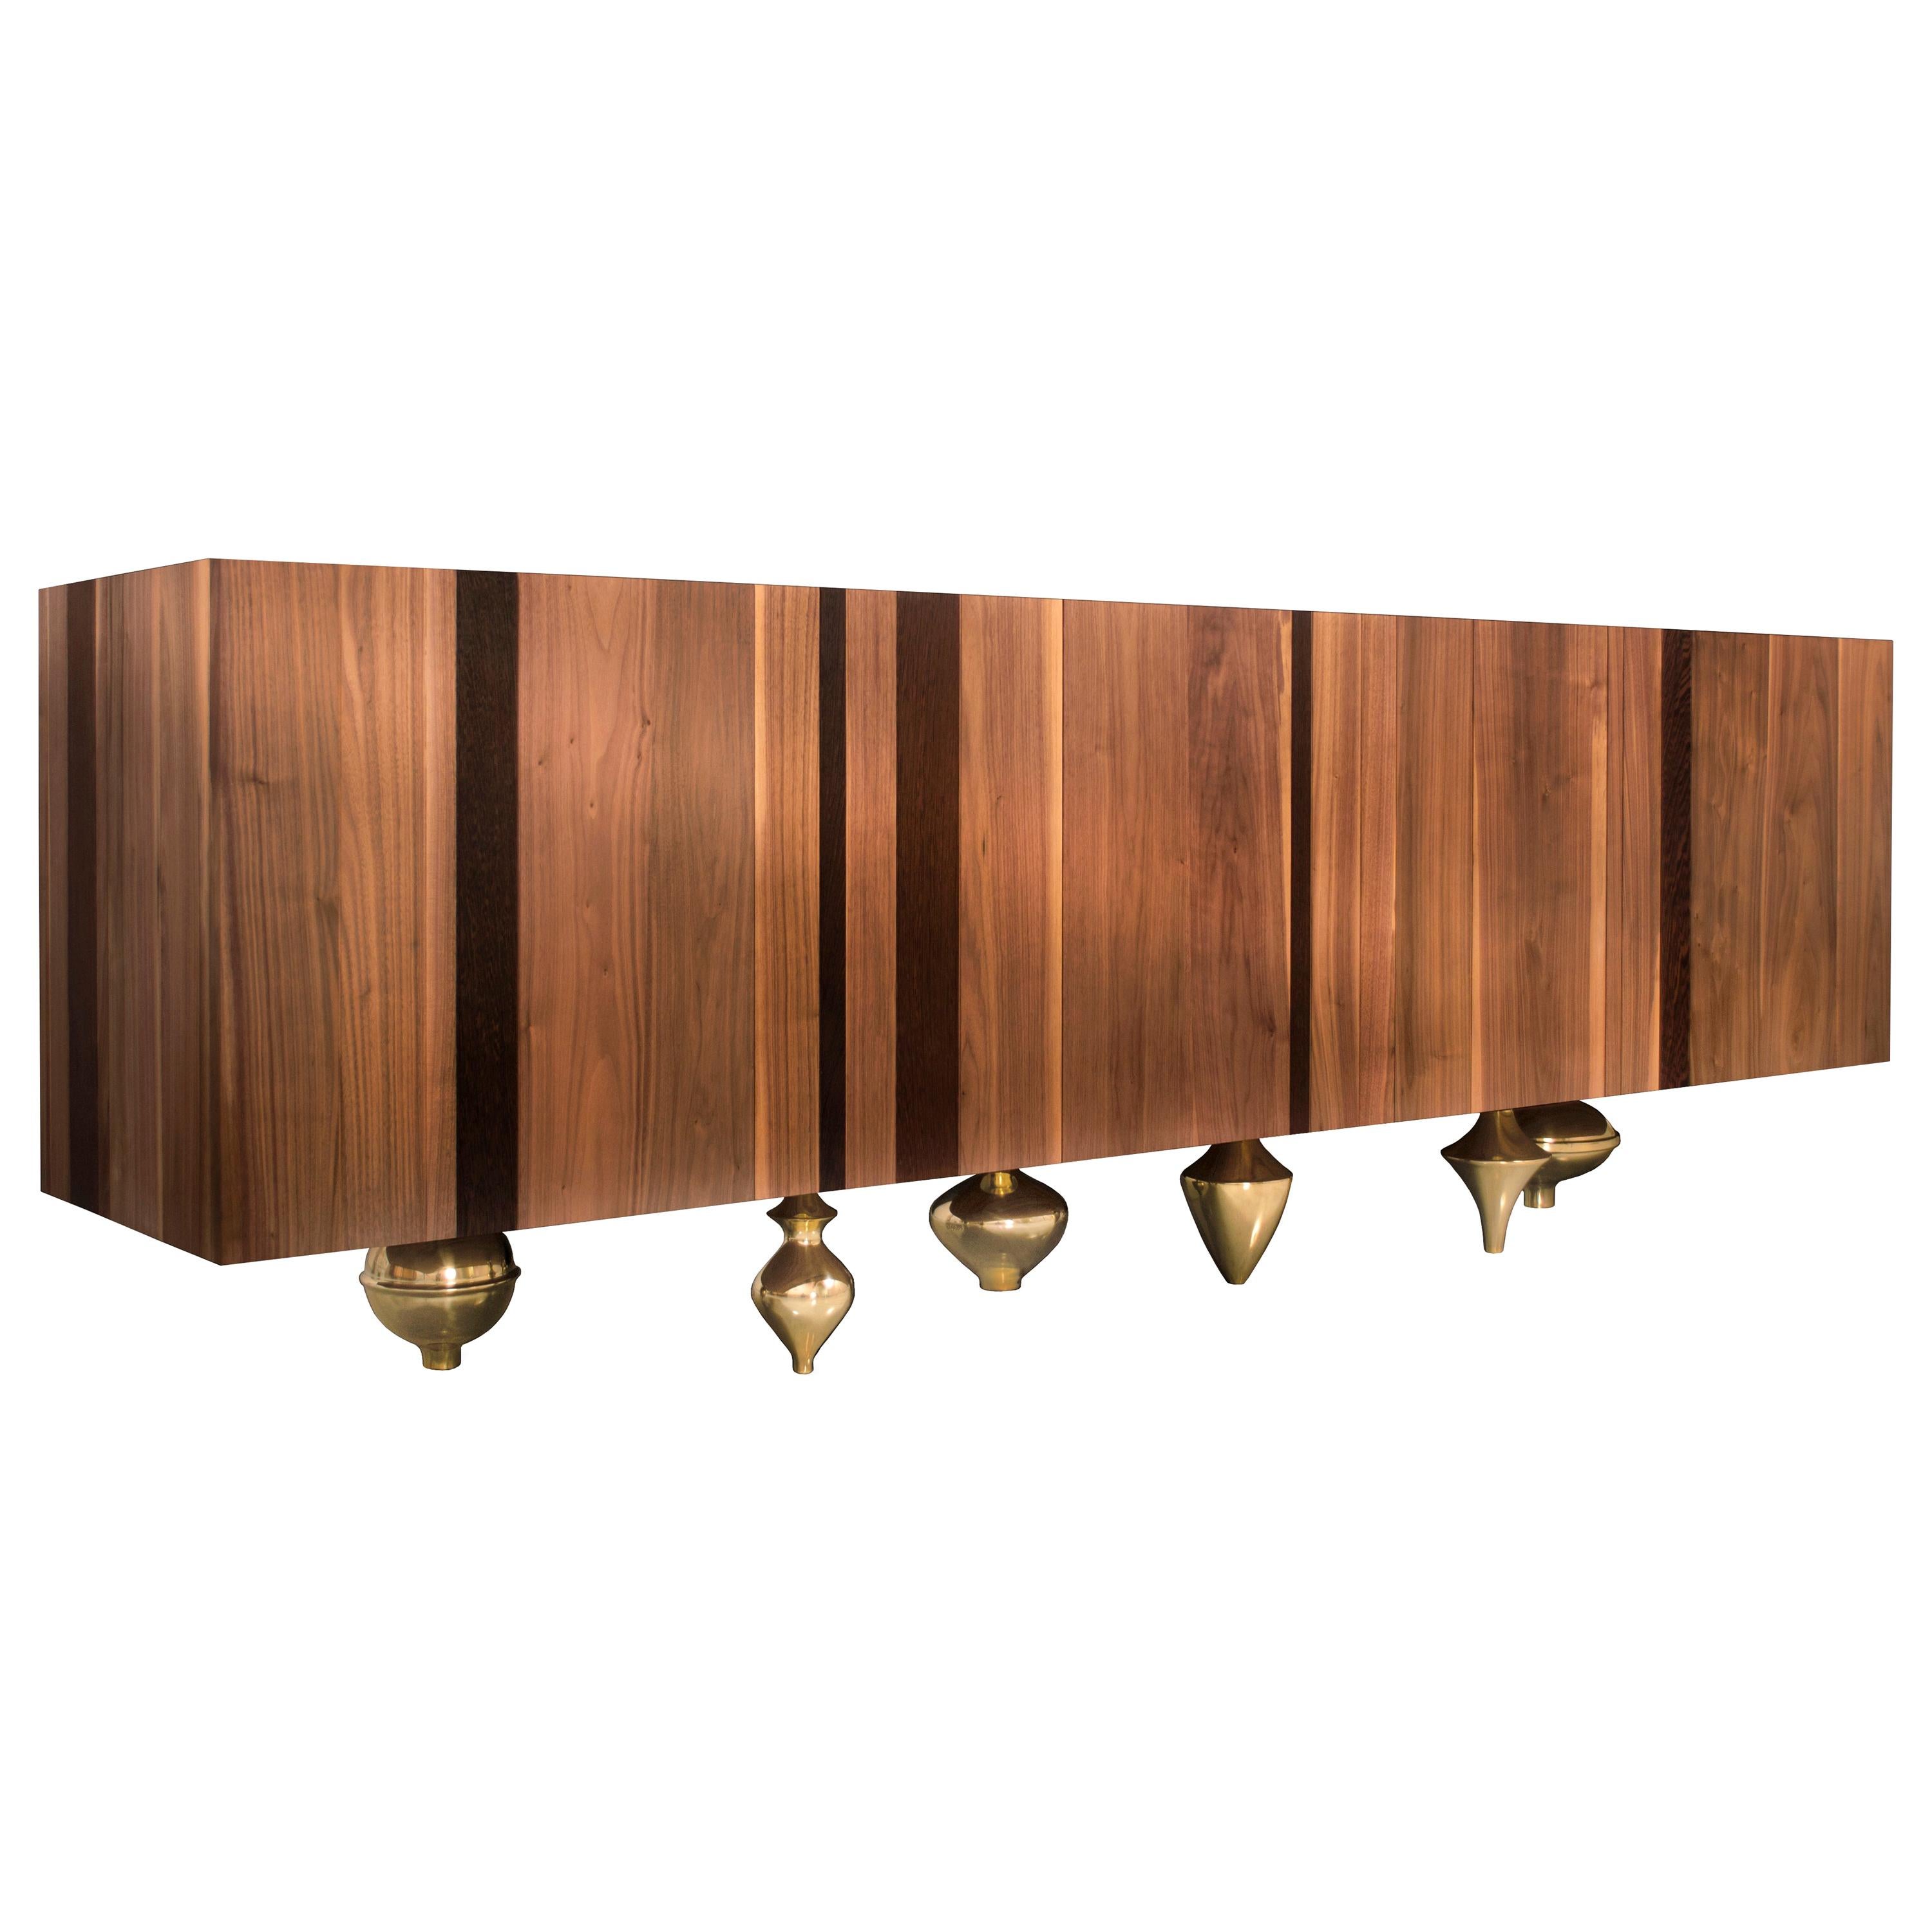 II Pezzo Credenza 1 in Wood, Brass and Marble For Sale